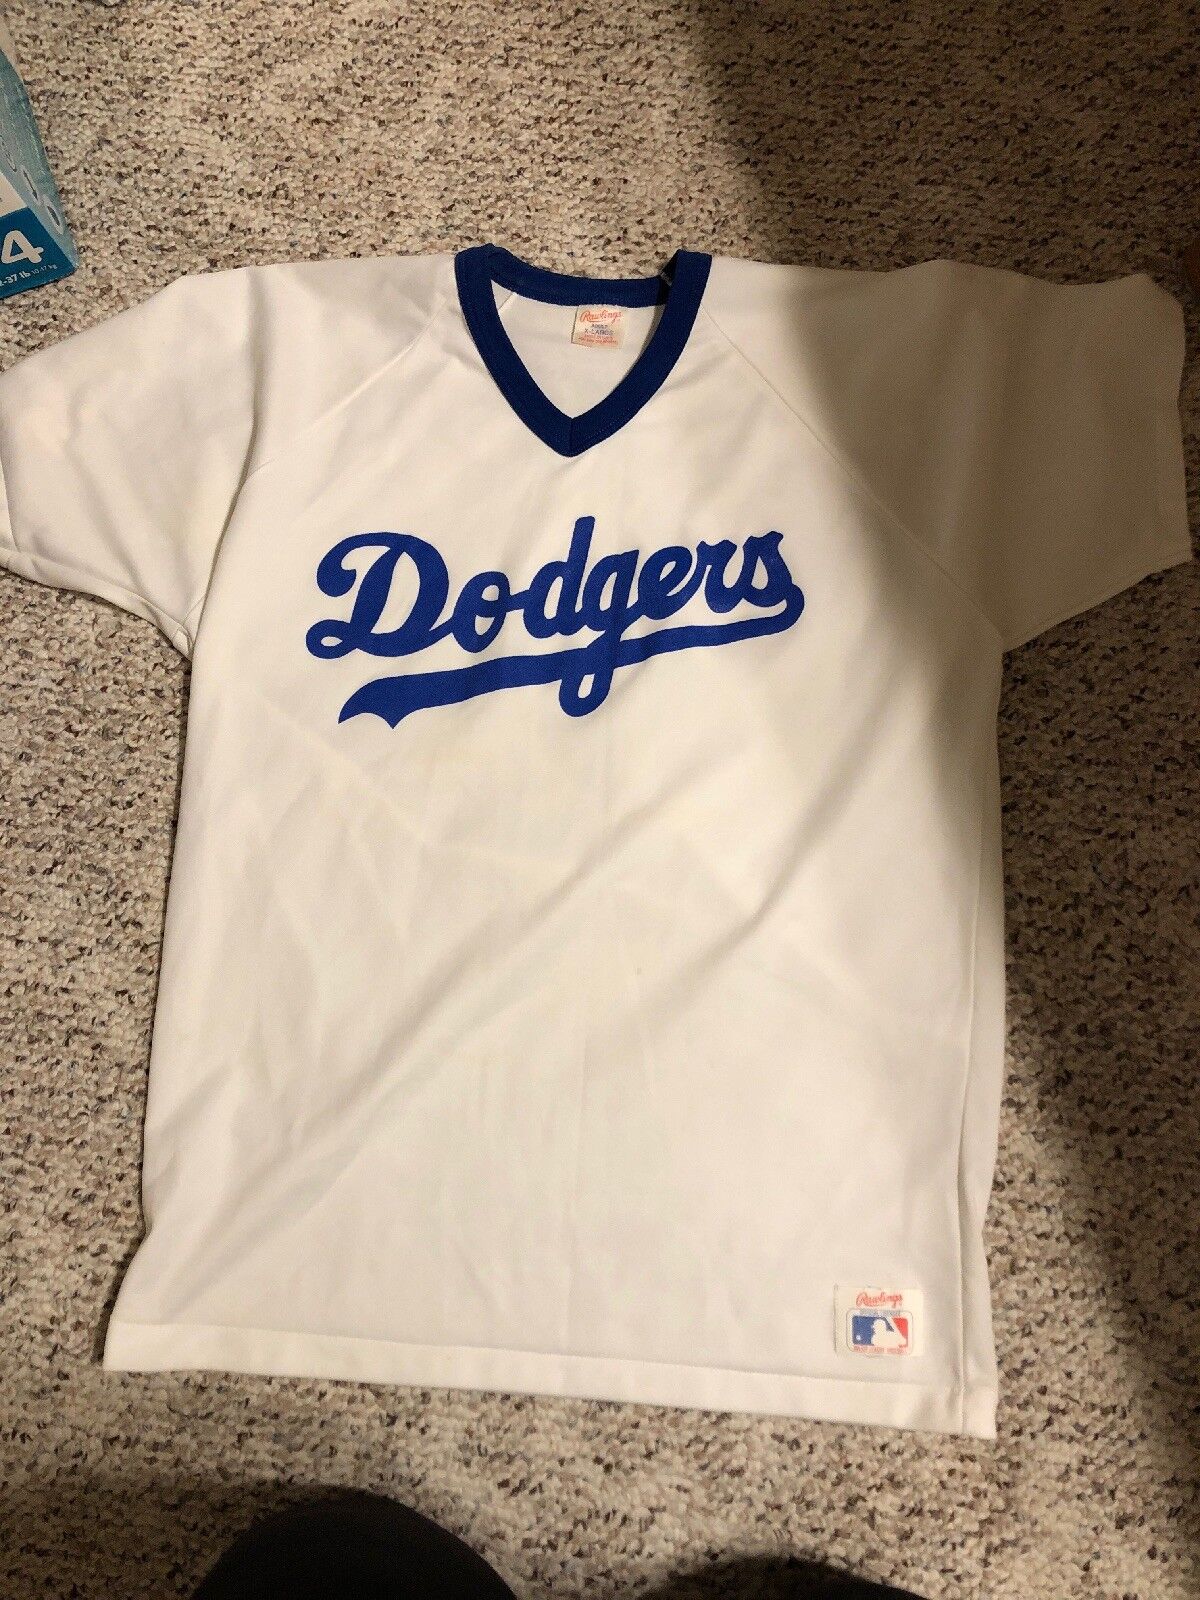 Vintage Rawlings Dodgers Jersey Size Xl White With Blue Writing Baseball